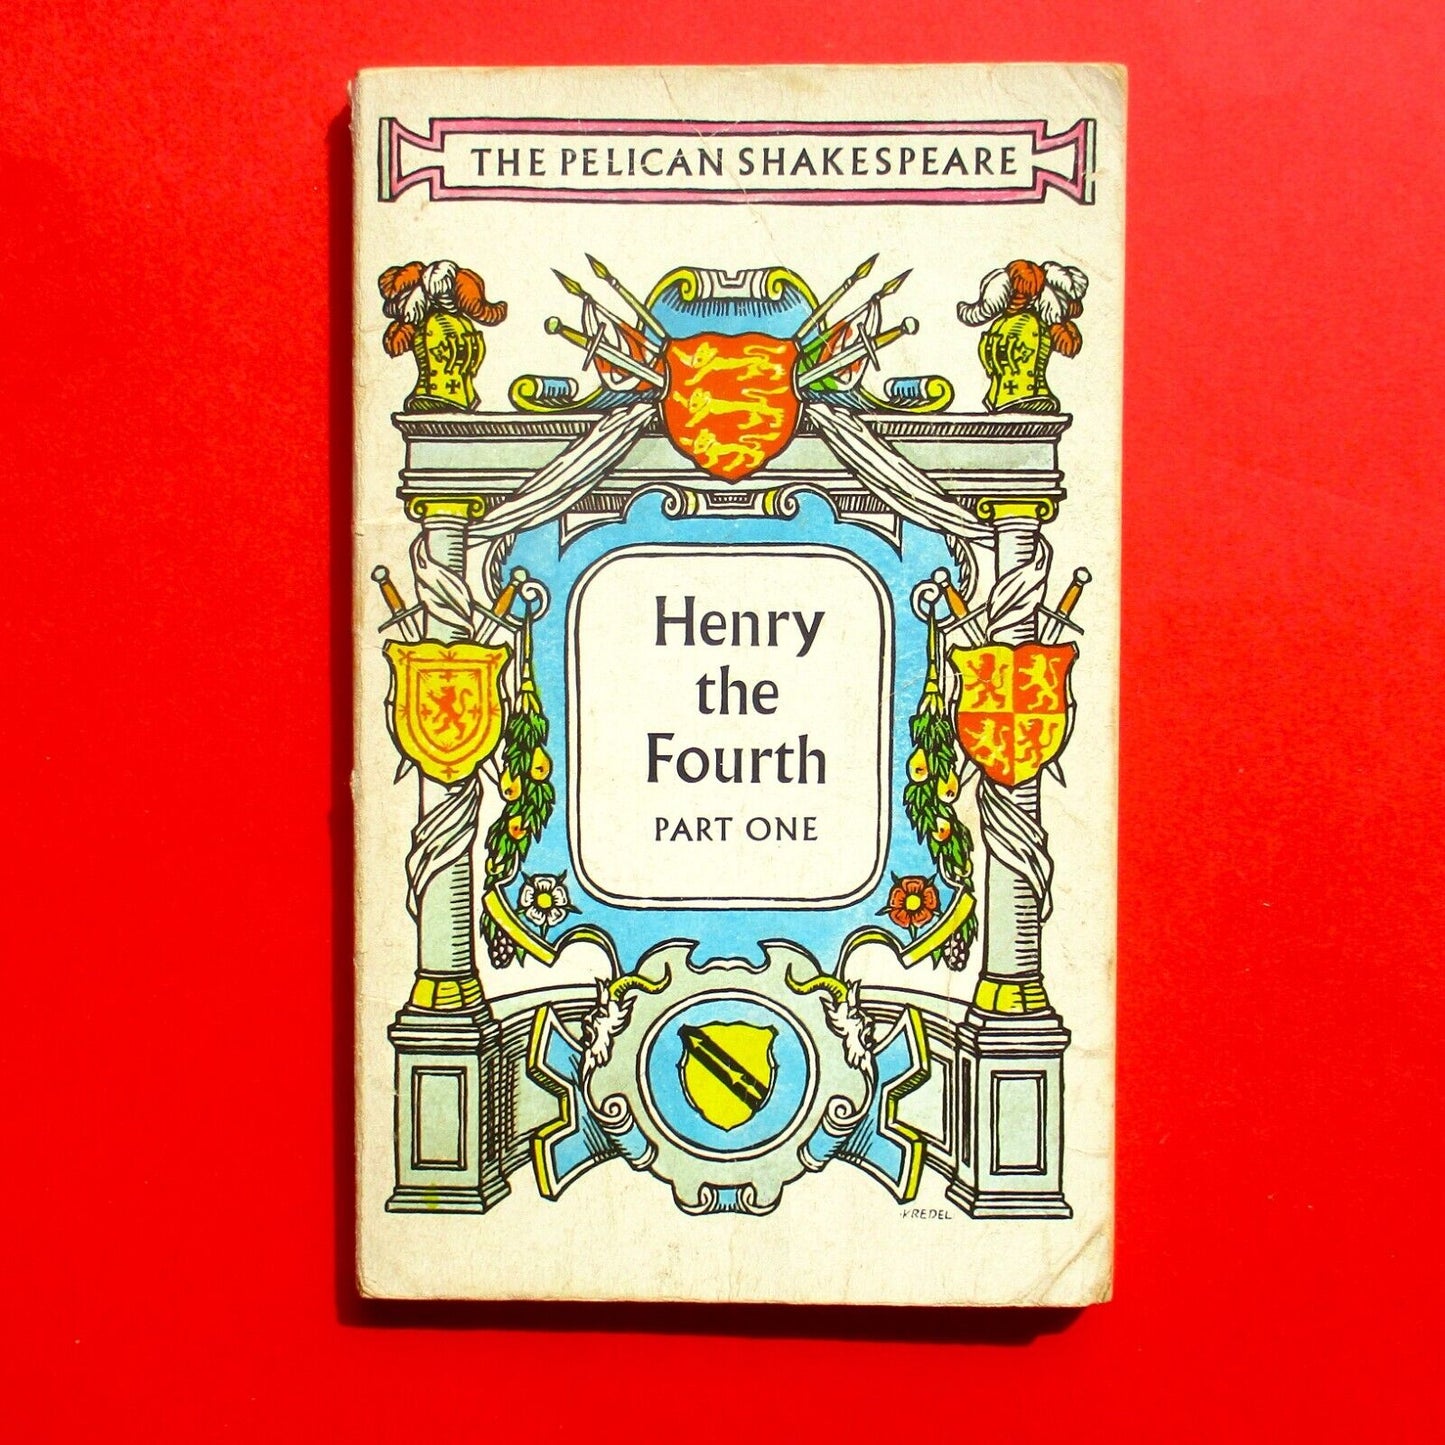 Henry the Fourth Part One by William Shakespeare 1970 Pelican Paperback